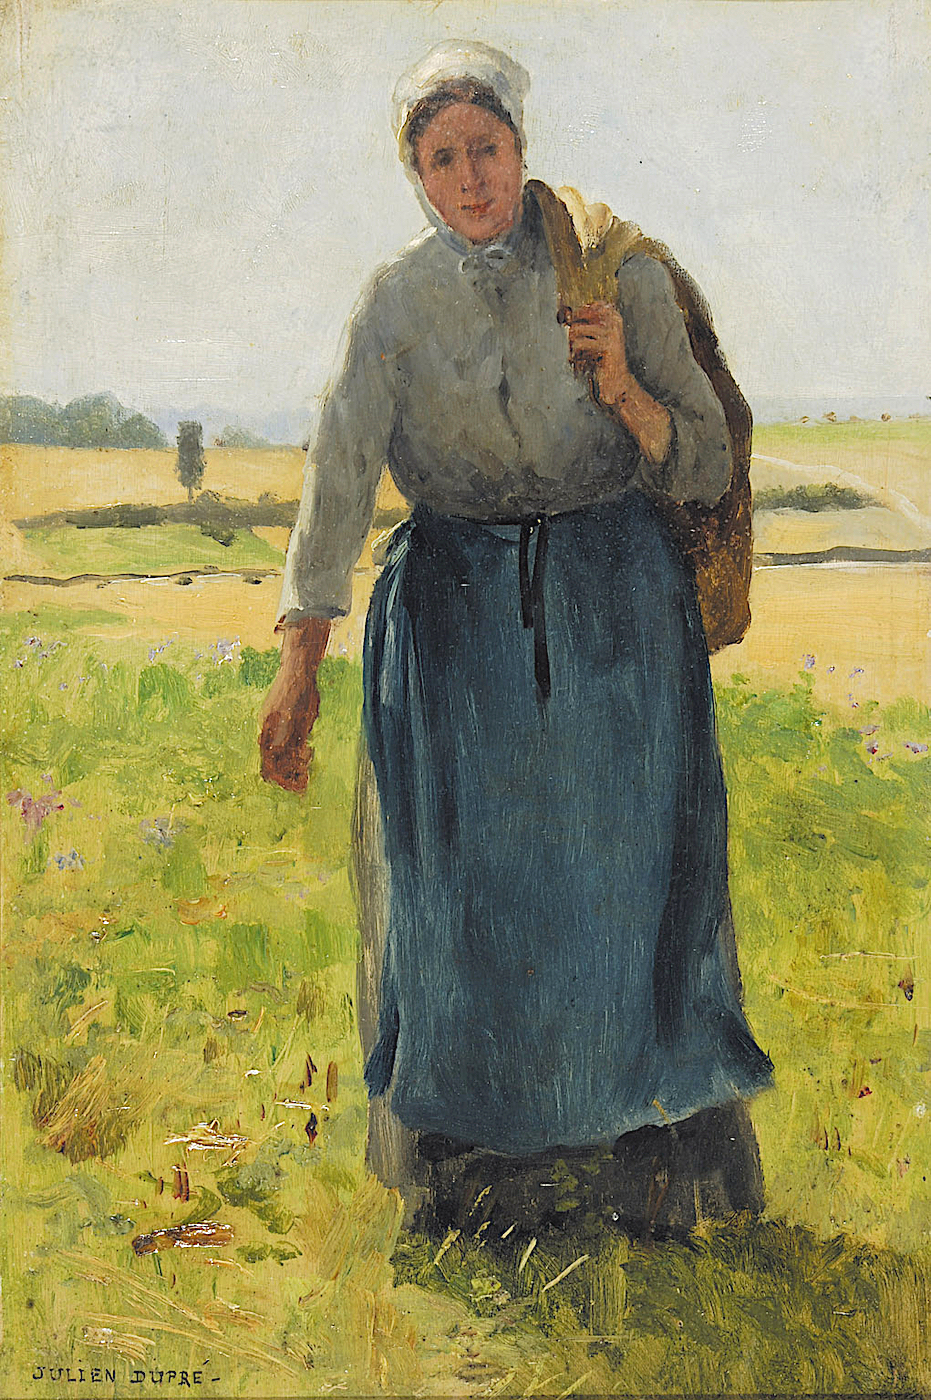 woman carrying a bag